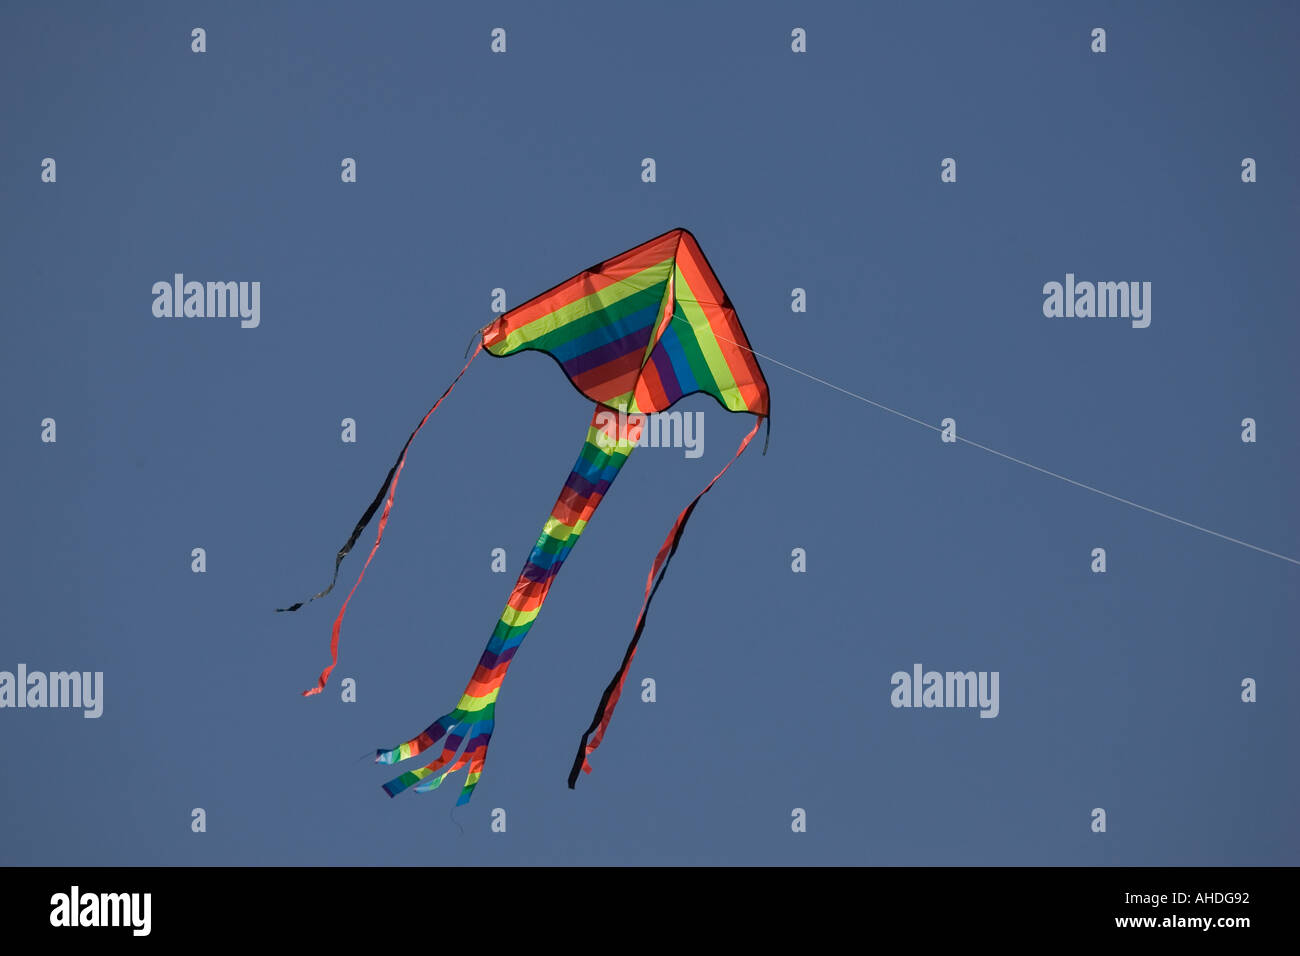 Colourful childs kite flying high in blue sky UK Stock Photo